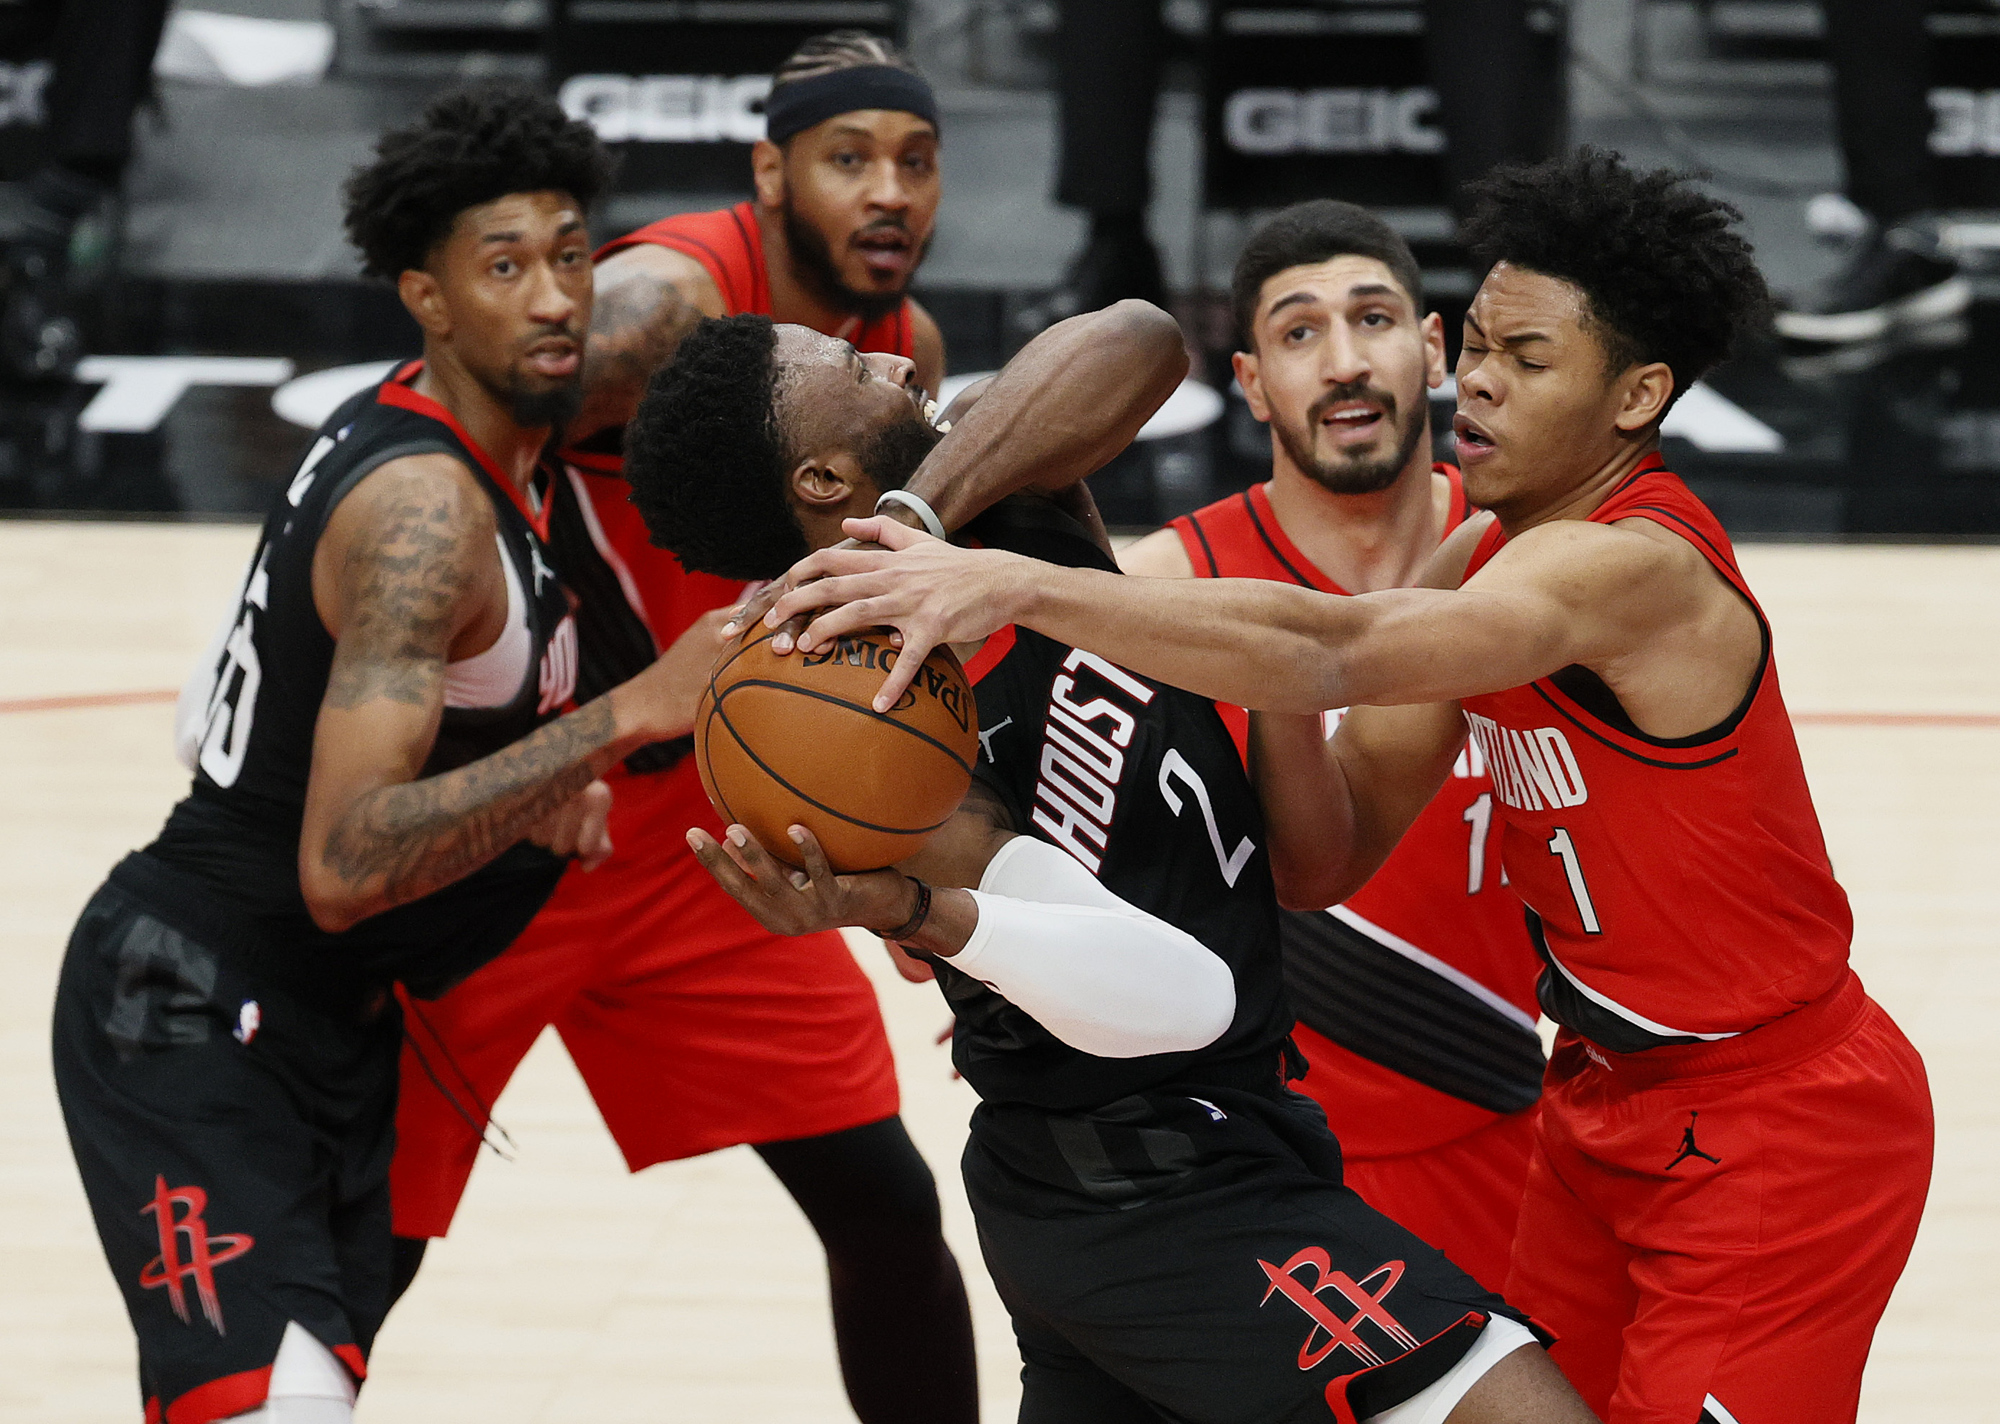 Portland Trail Blazers at Houston Rockets: Game preview, time, TV channel, how to watch free live online - oregonlive.com